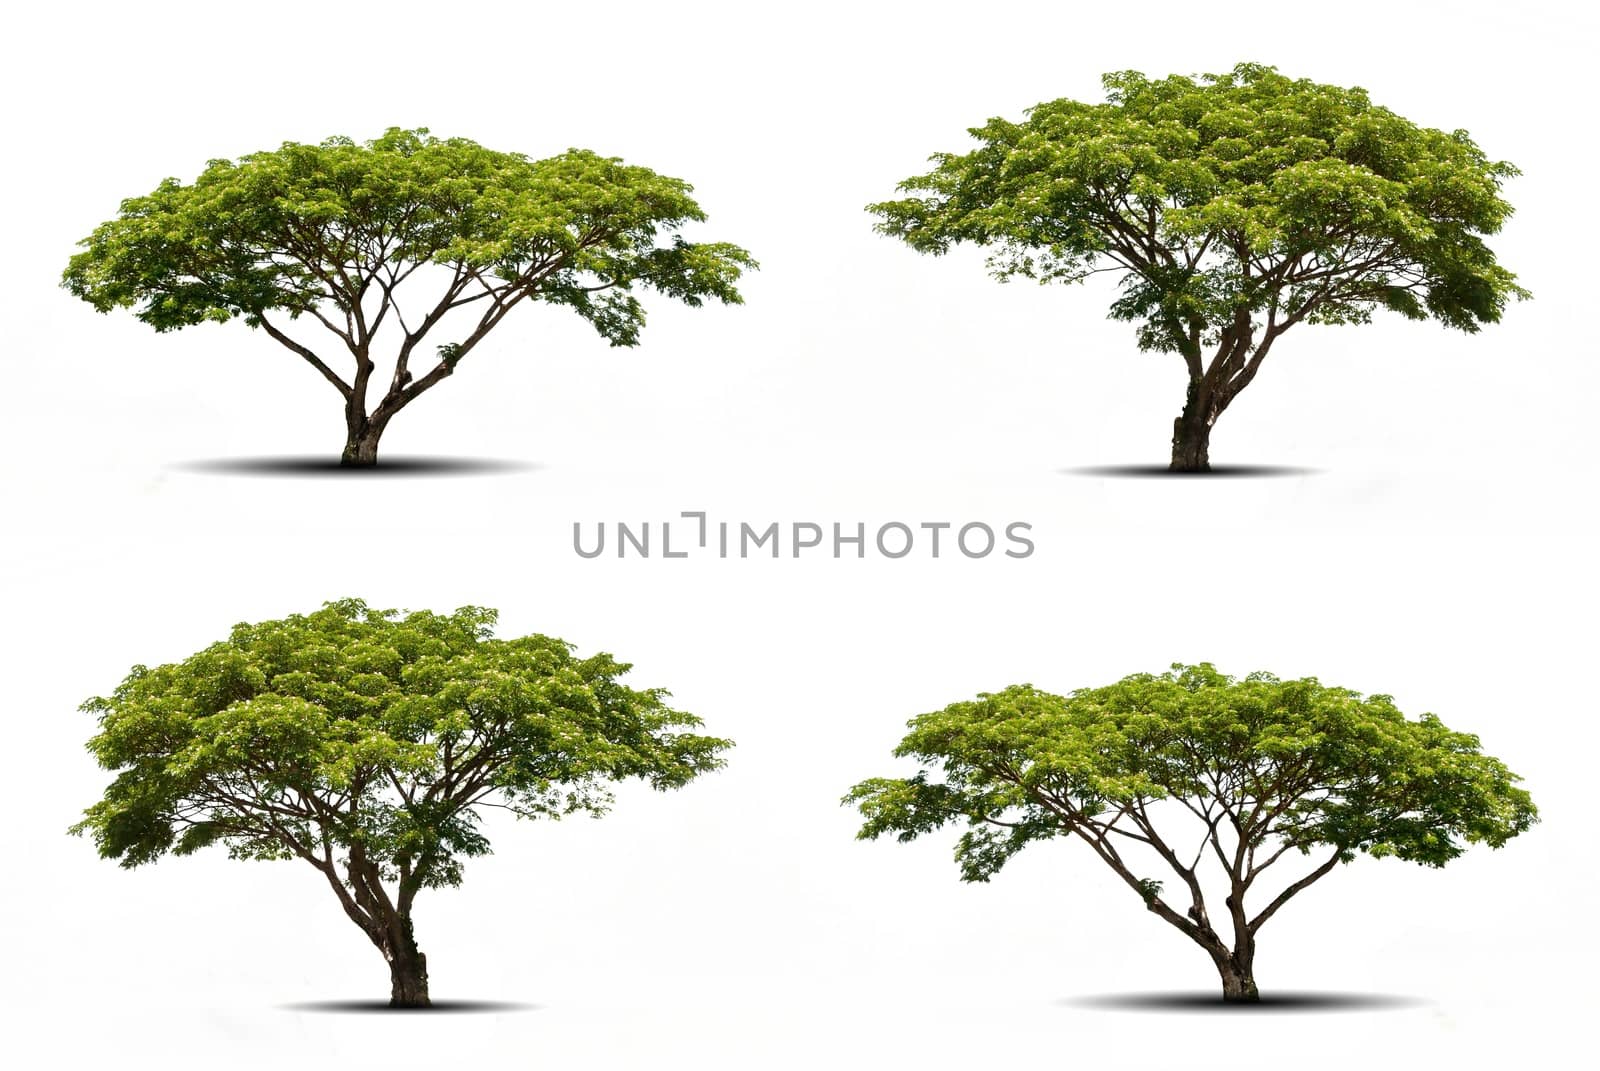 collections green tree isolated. green tree isolated on white background.